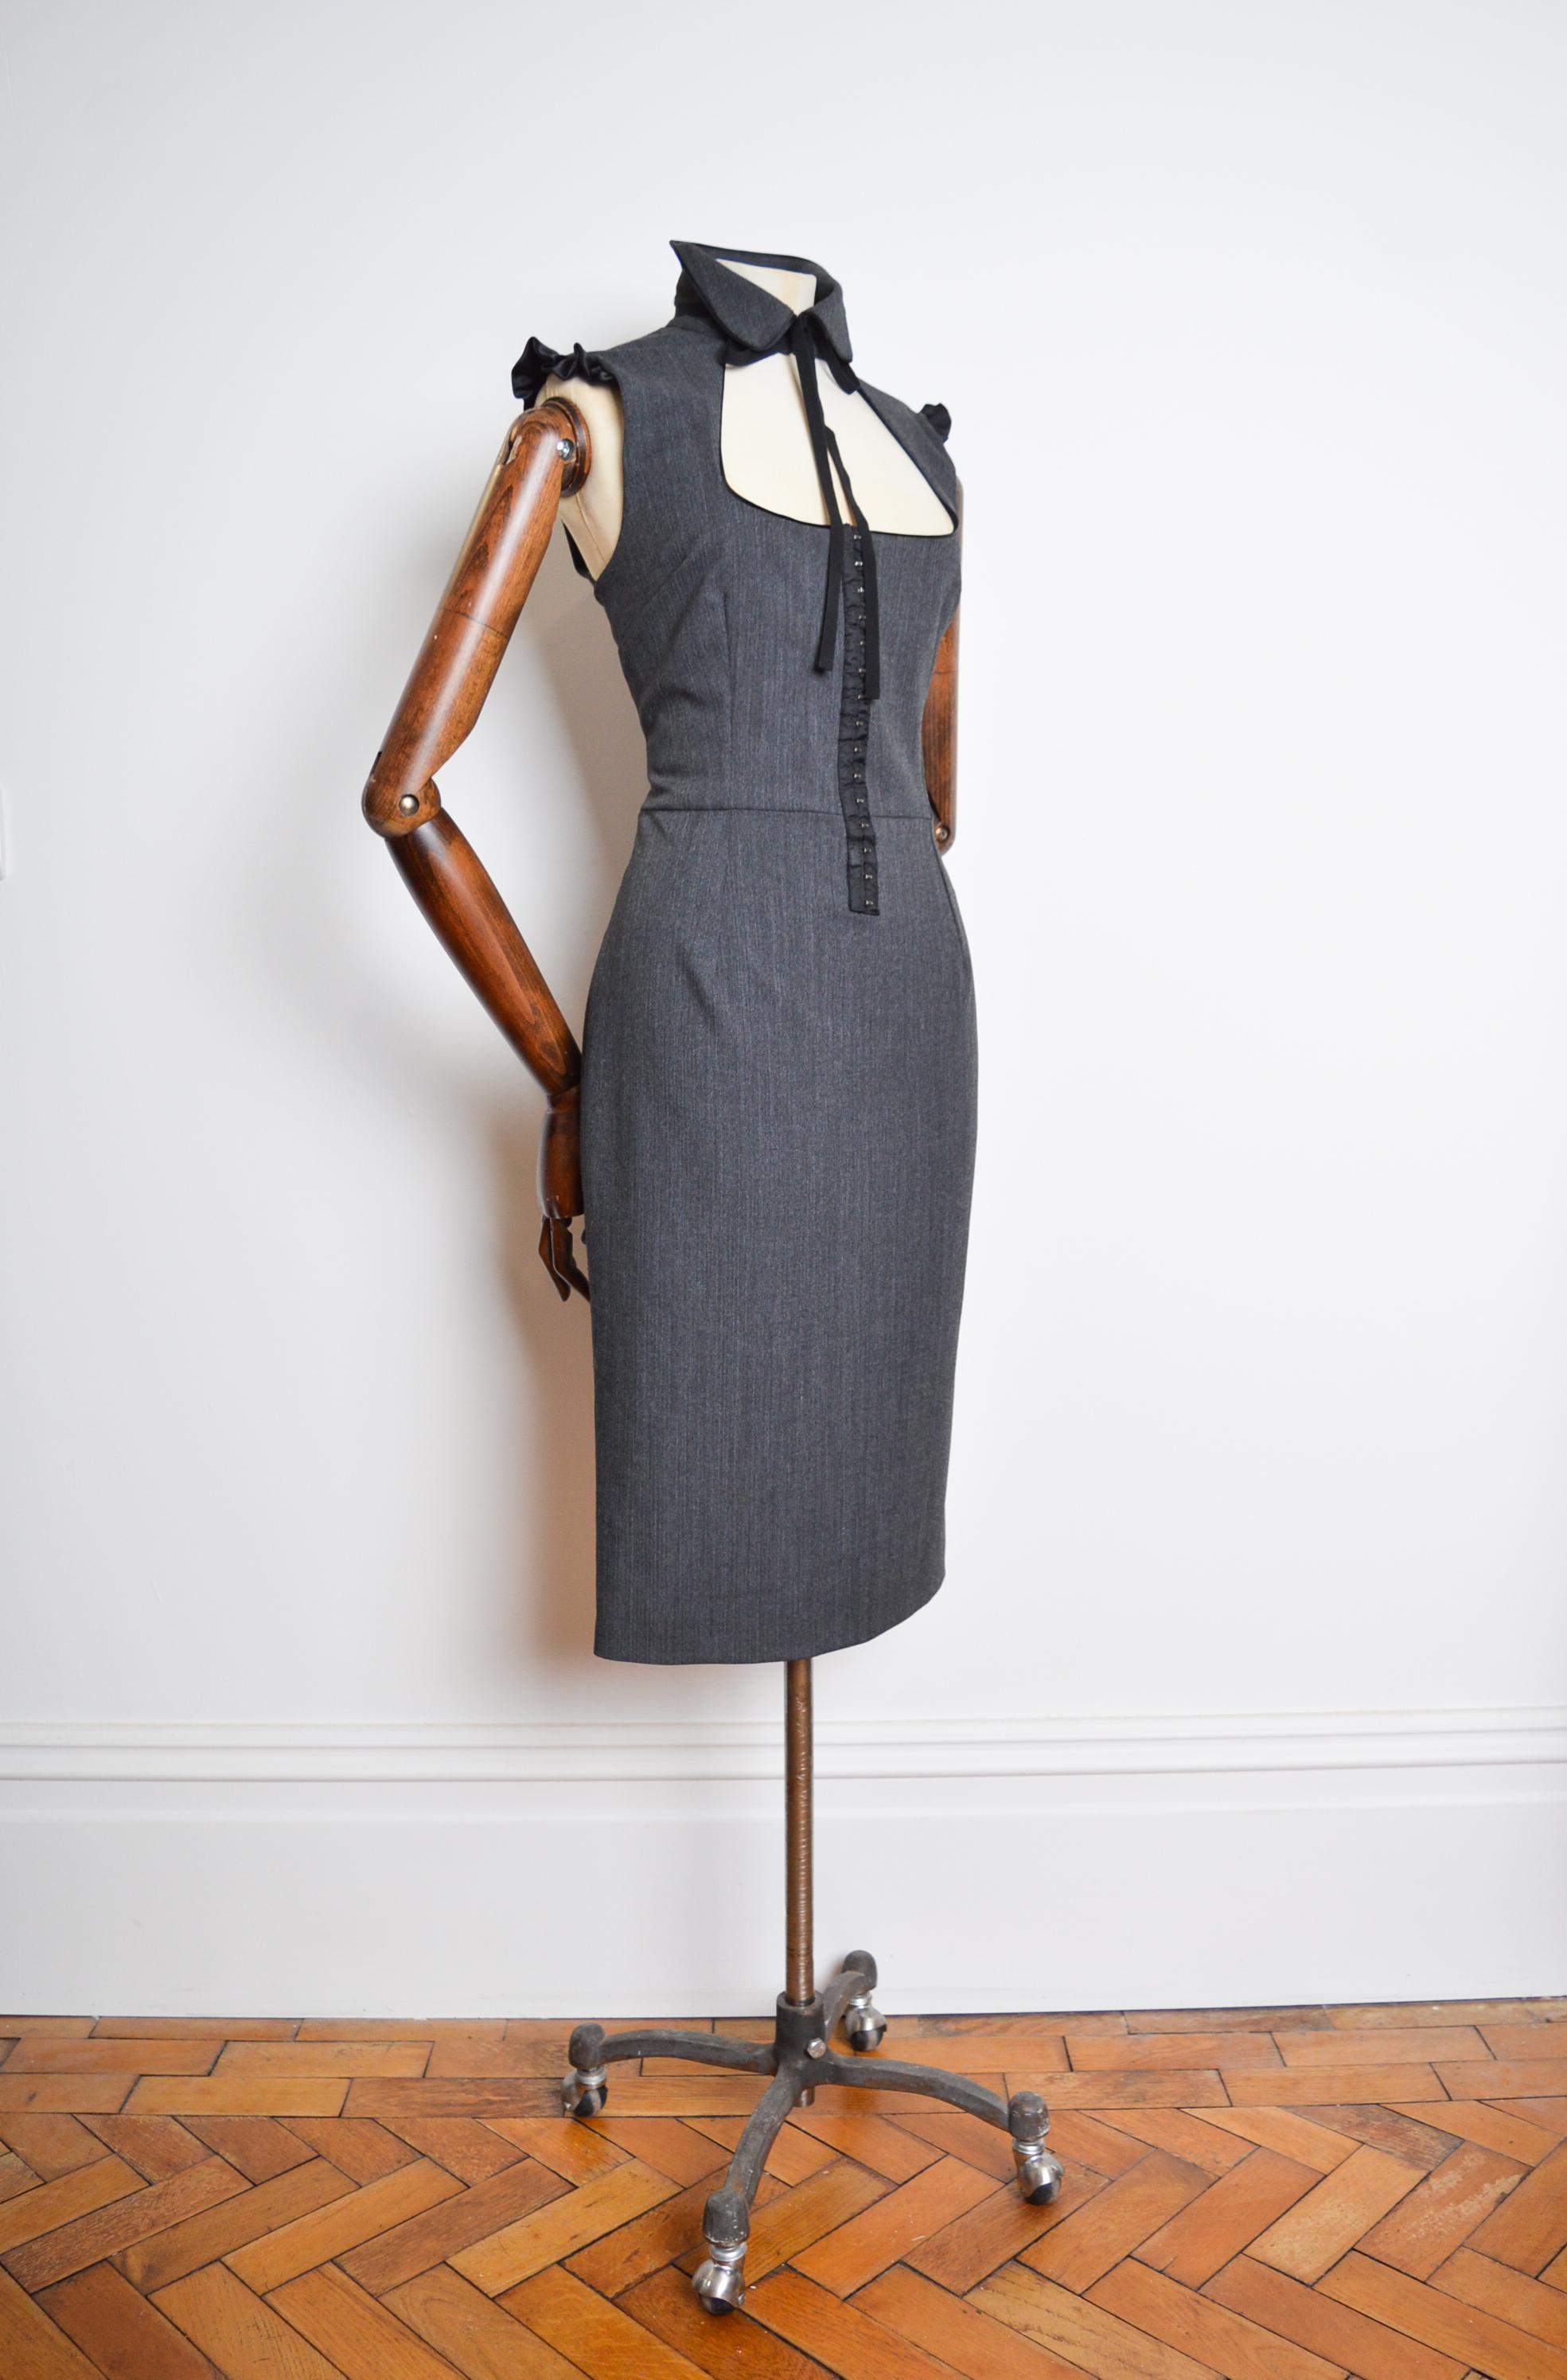 Elegant, Vintage DOLCE & GABBANA Dress, Circa 2009.  

This Luxurious, Key Hole Collared 'Peter Pan dress' is both Elegant and Sexy, crafted from a simple Pinstriped wool cloth, with a corseted waist line and to the Knee length hem.  

Our